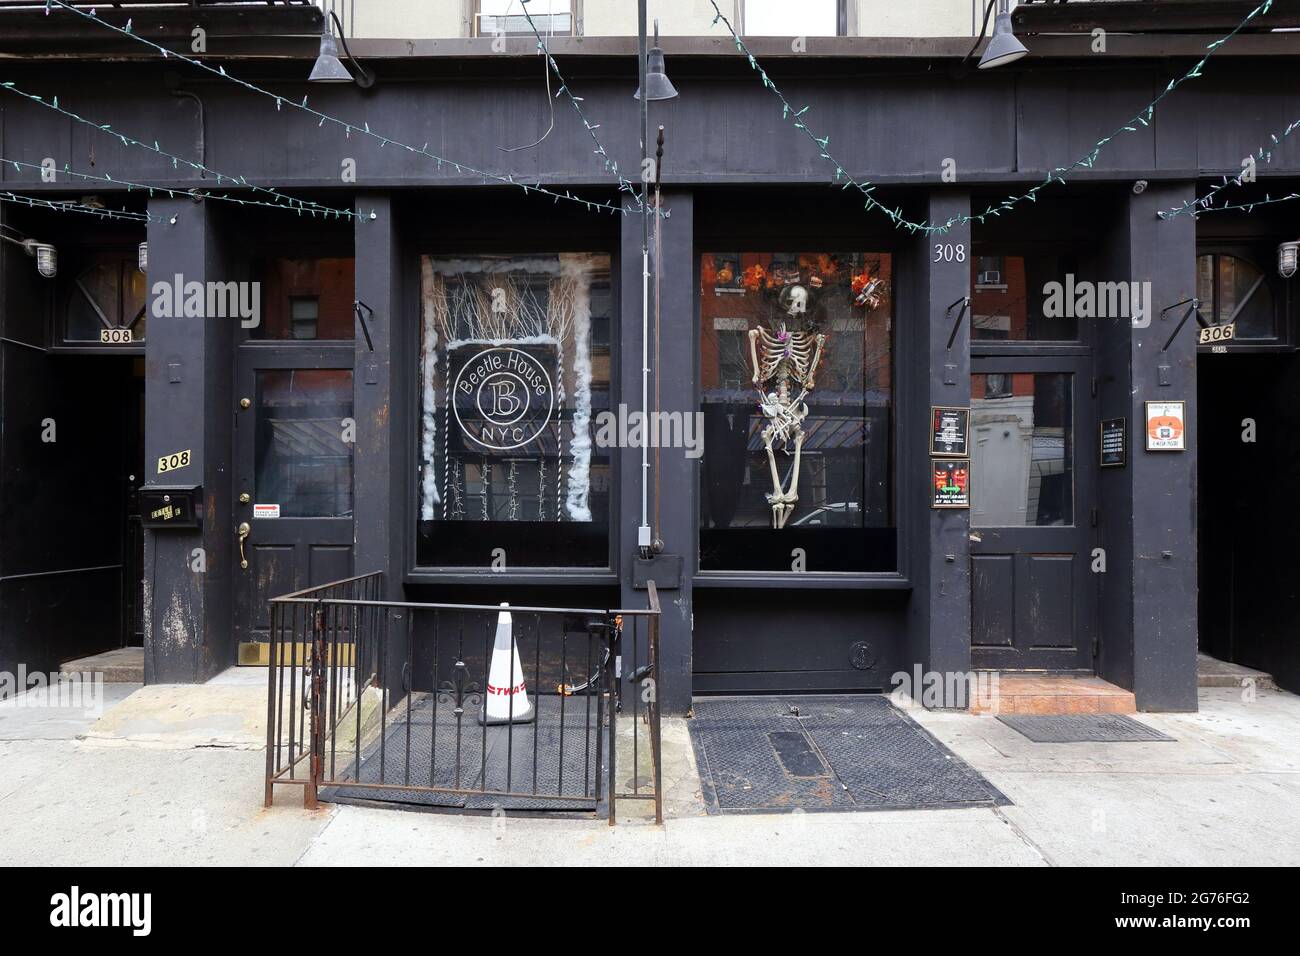 Beetle House, 308 E 6th St, New York, NY. exterior storefront of a Burtonesque inspired goth bar in the East Village neighborhood of Manhattan. Stock Photo